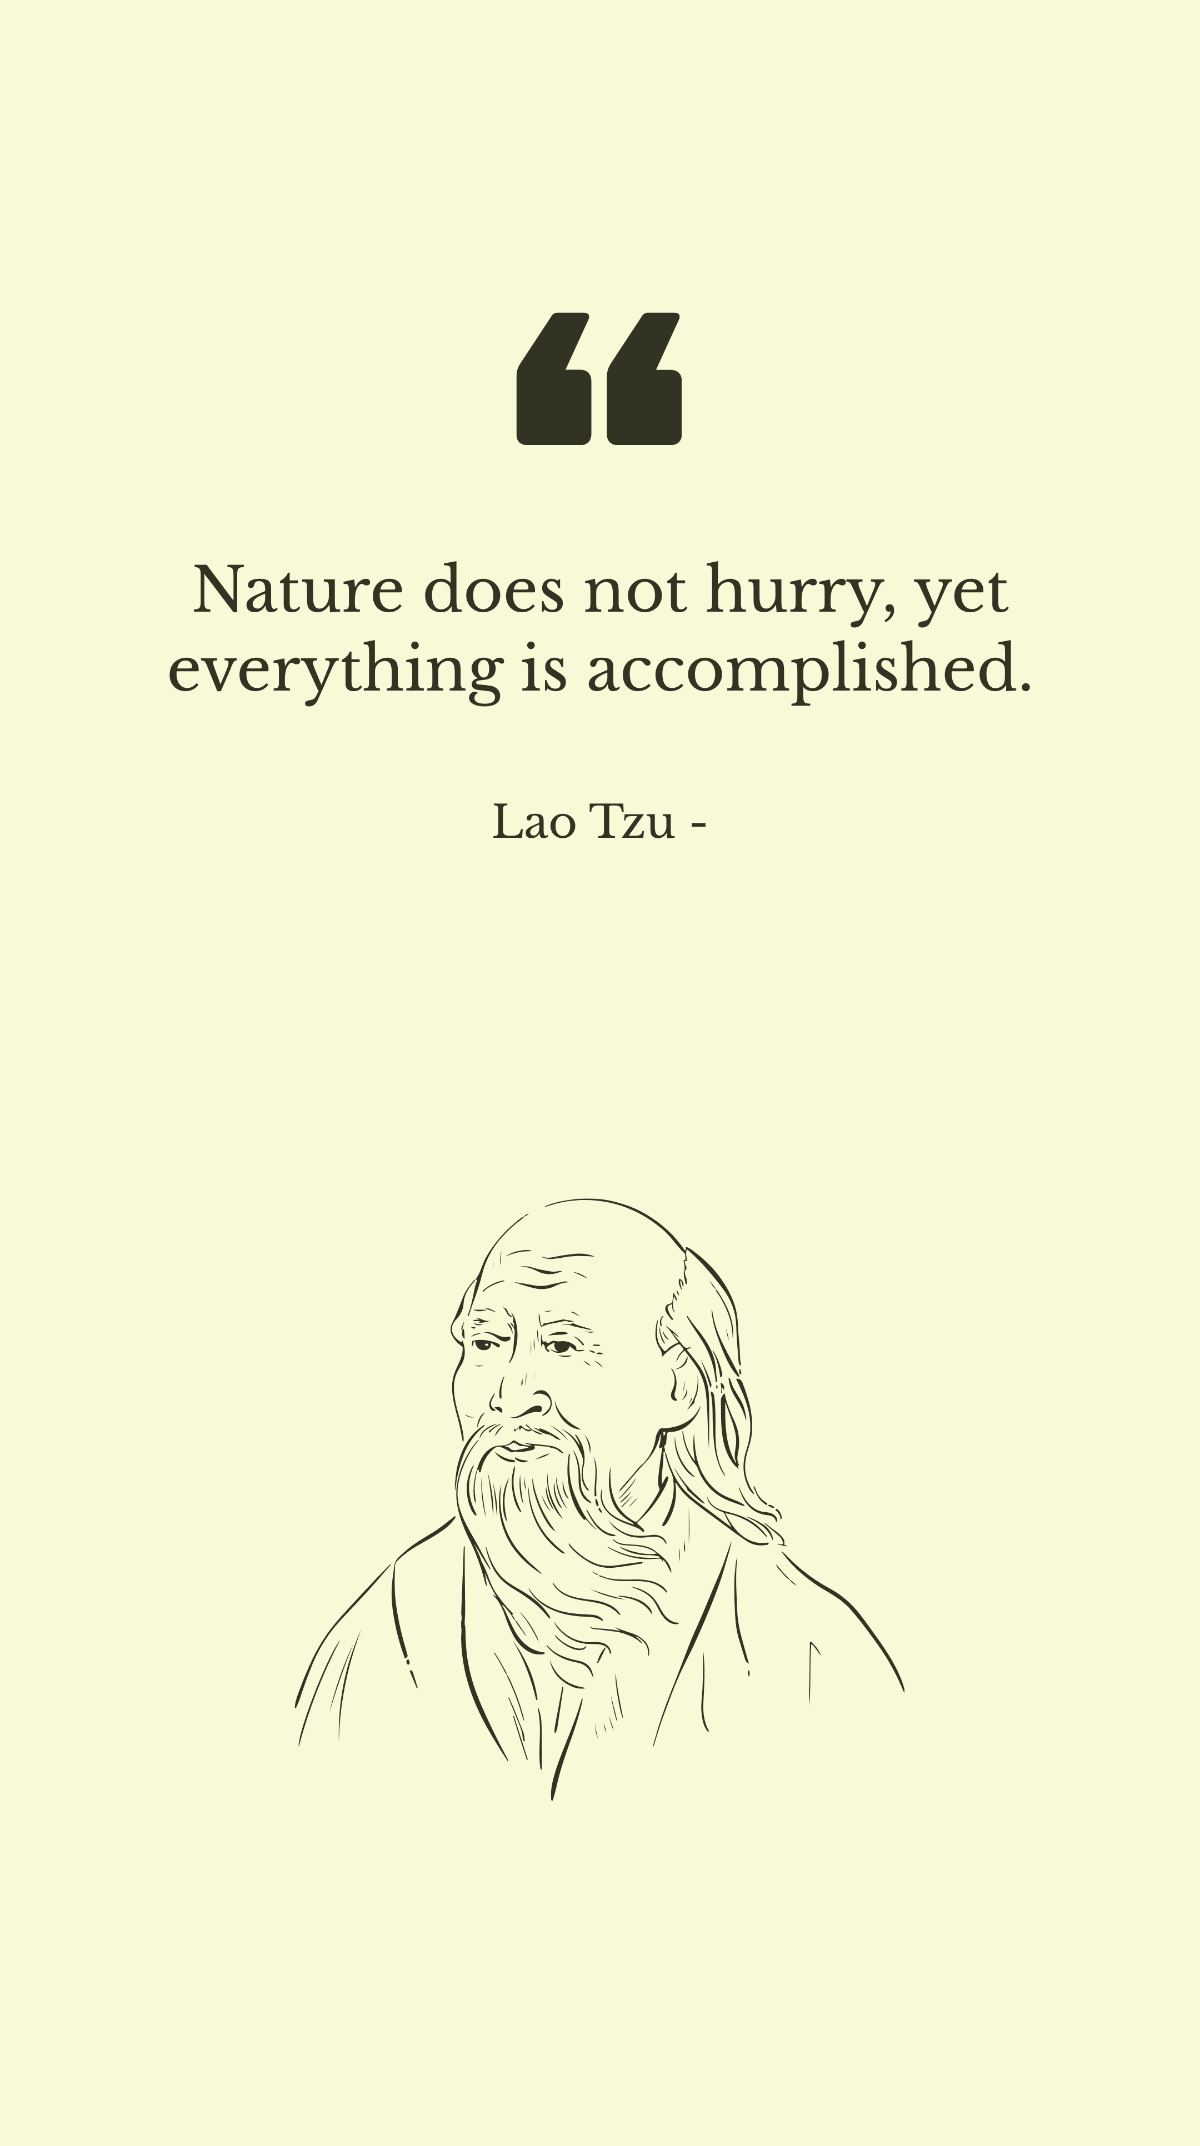 Lao Tzu - Nature does not hurry, yet everything is accomplished.